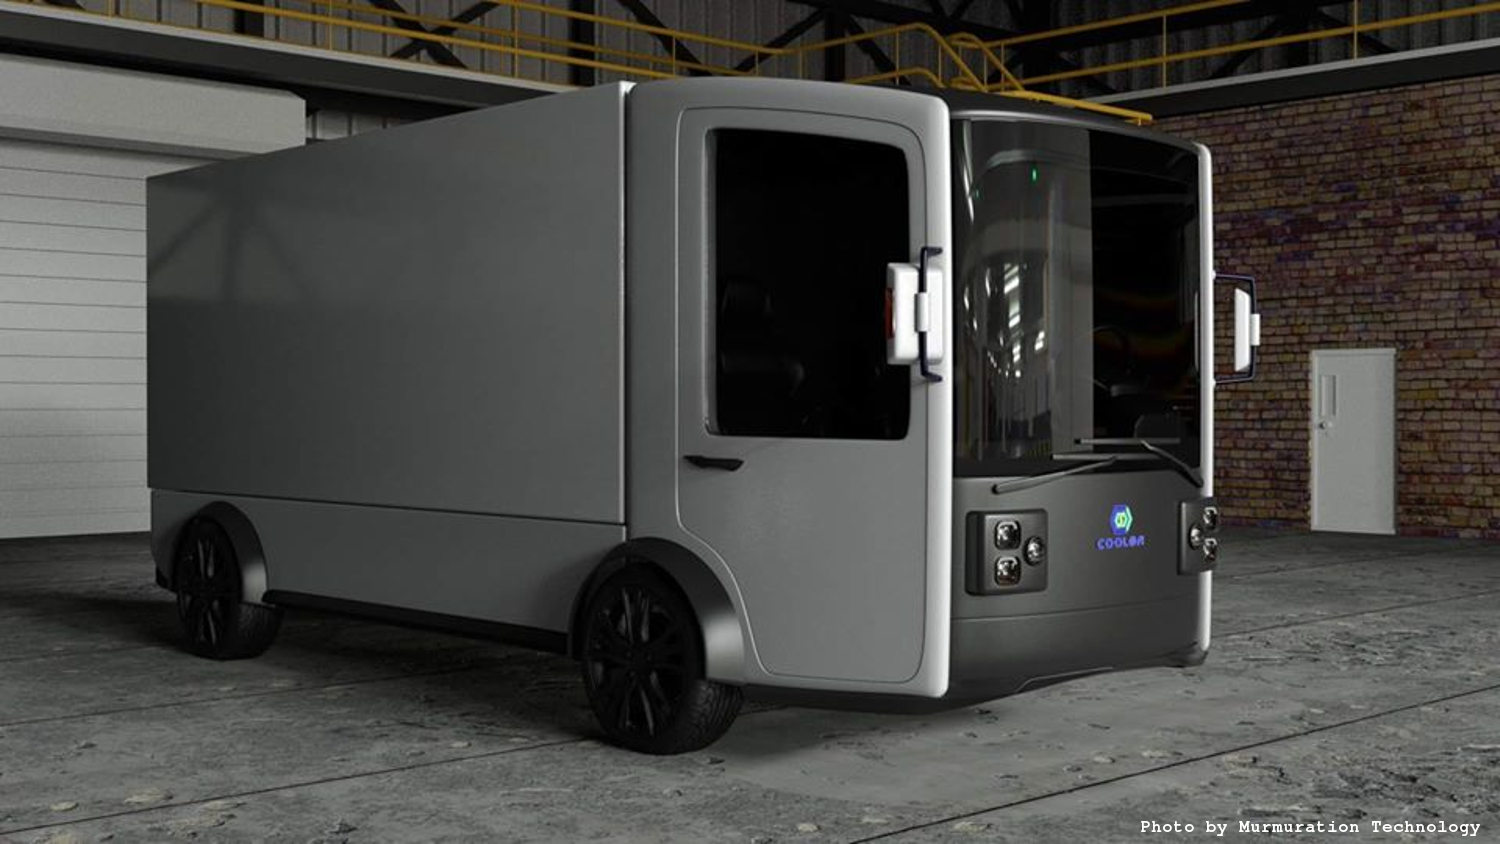 Ukrainian company introduced commercial vehicle with an innovative magnetless electric motor 1